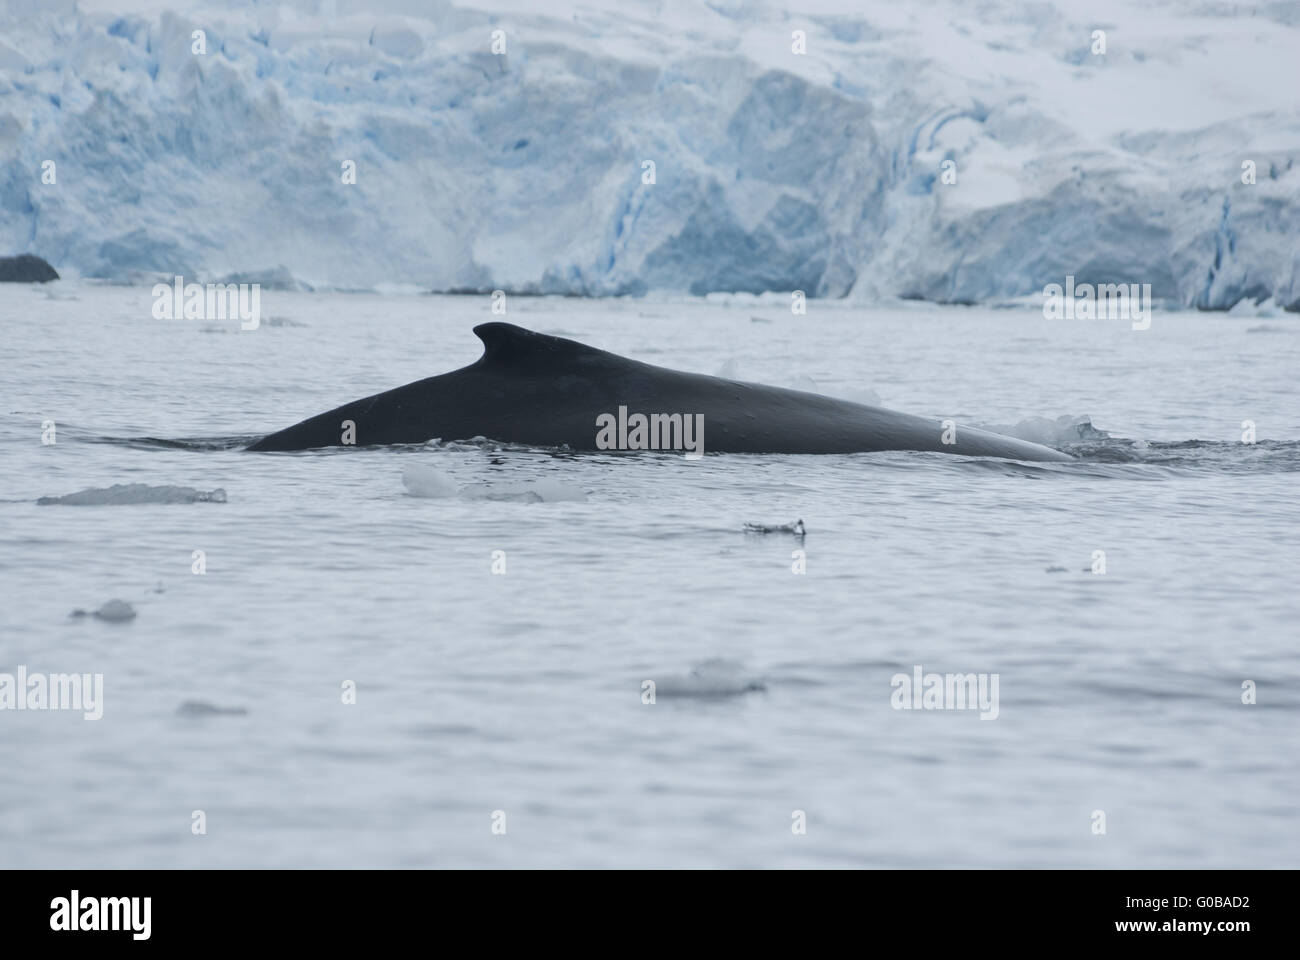 A humpback whale in the Southern Ocean-3. Stock Photo